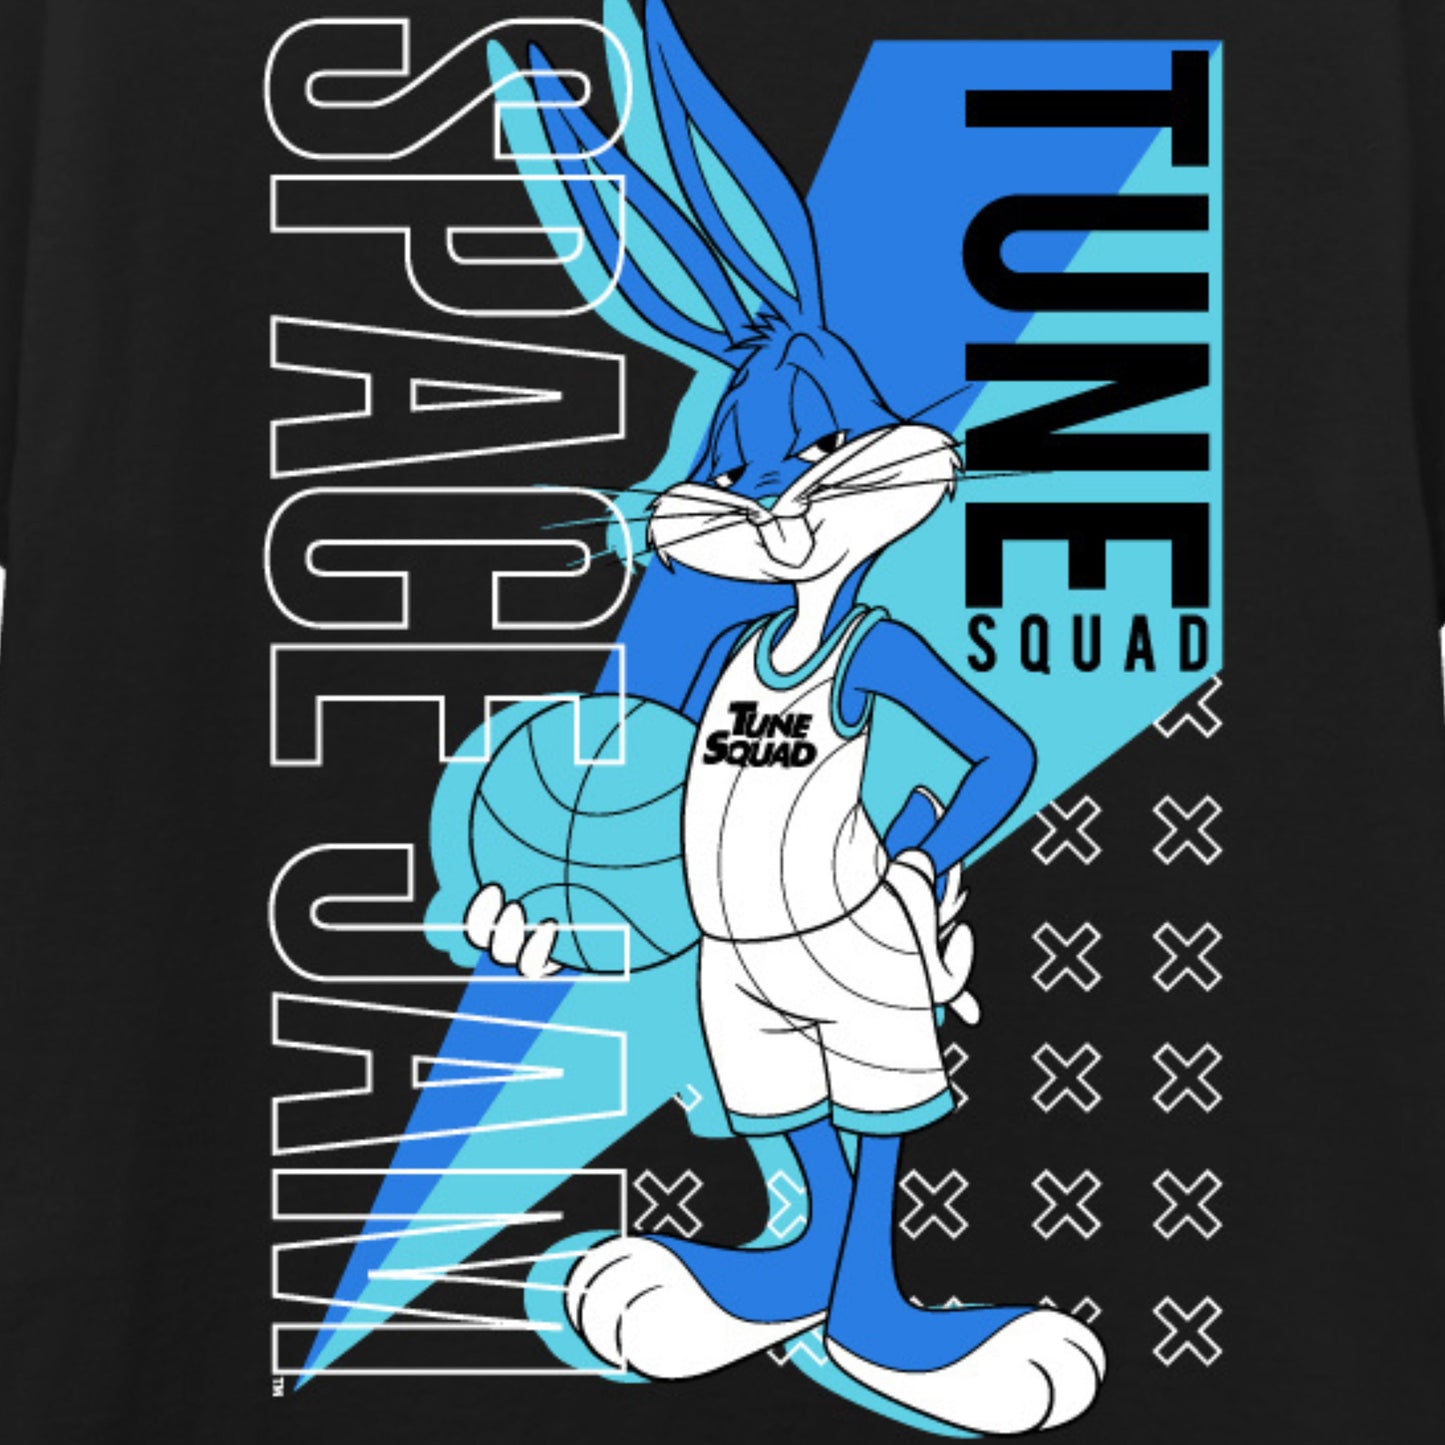 Men's Space Jam A New Legacy Short Sleeve T-Shirt- Looney Tunes Tune Squad Bugs Bunny T-Shirt